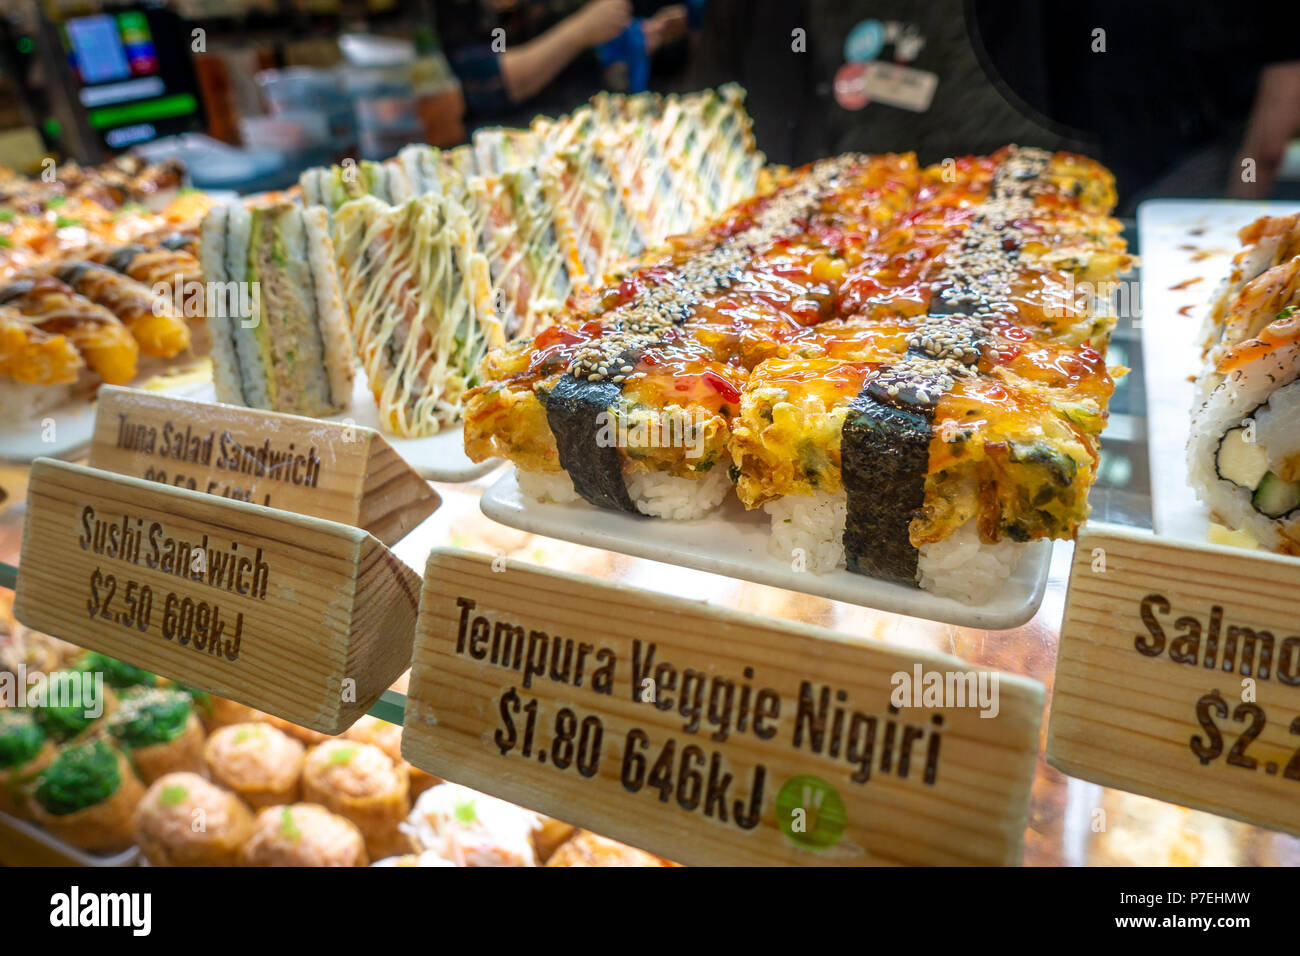 Different kinds of sushi displayed in counter with English name, calories and price listed on each tag. Melbourne, VIC Australia. Stock Photo